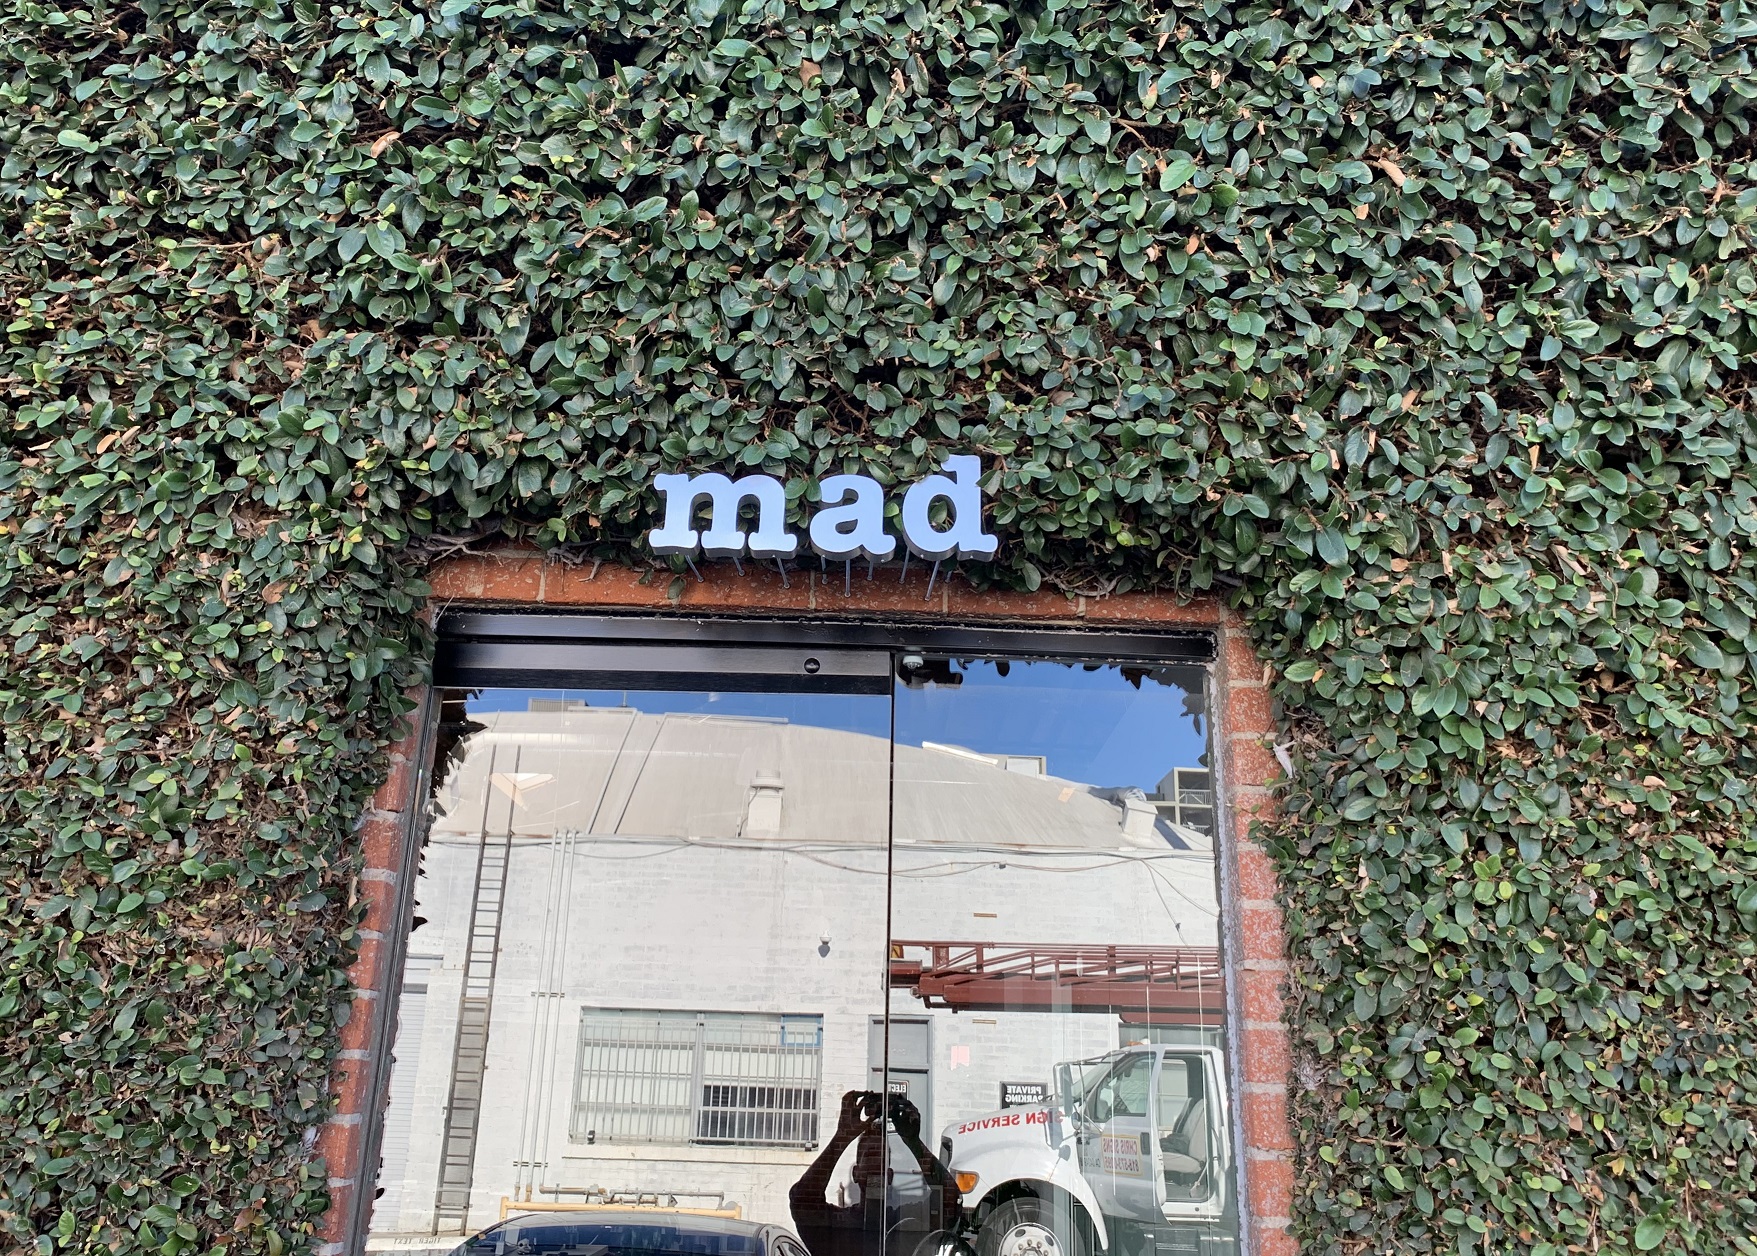 You are currently viewing Entrance Dimensional Letters for Mad Architects in Santa Monica